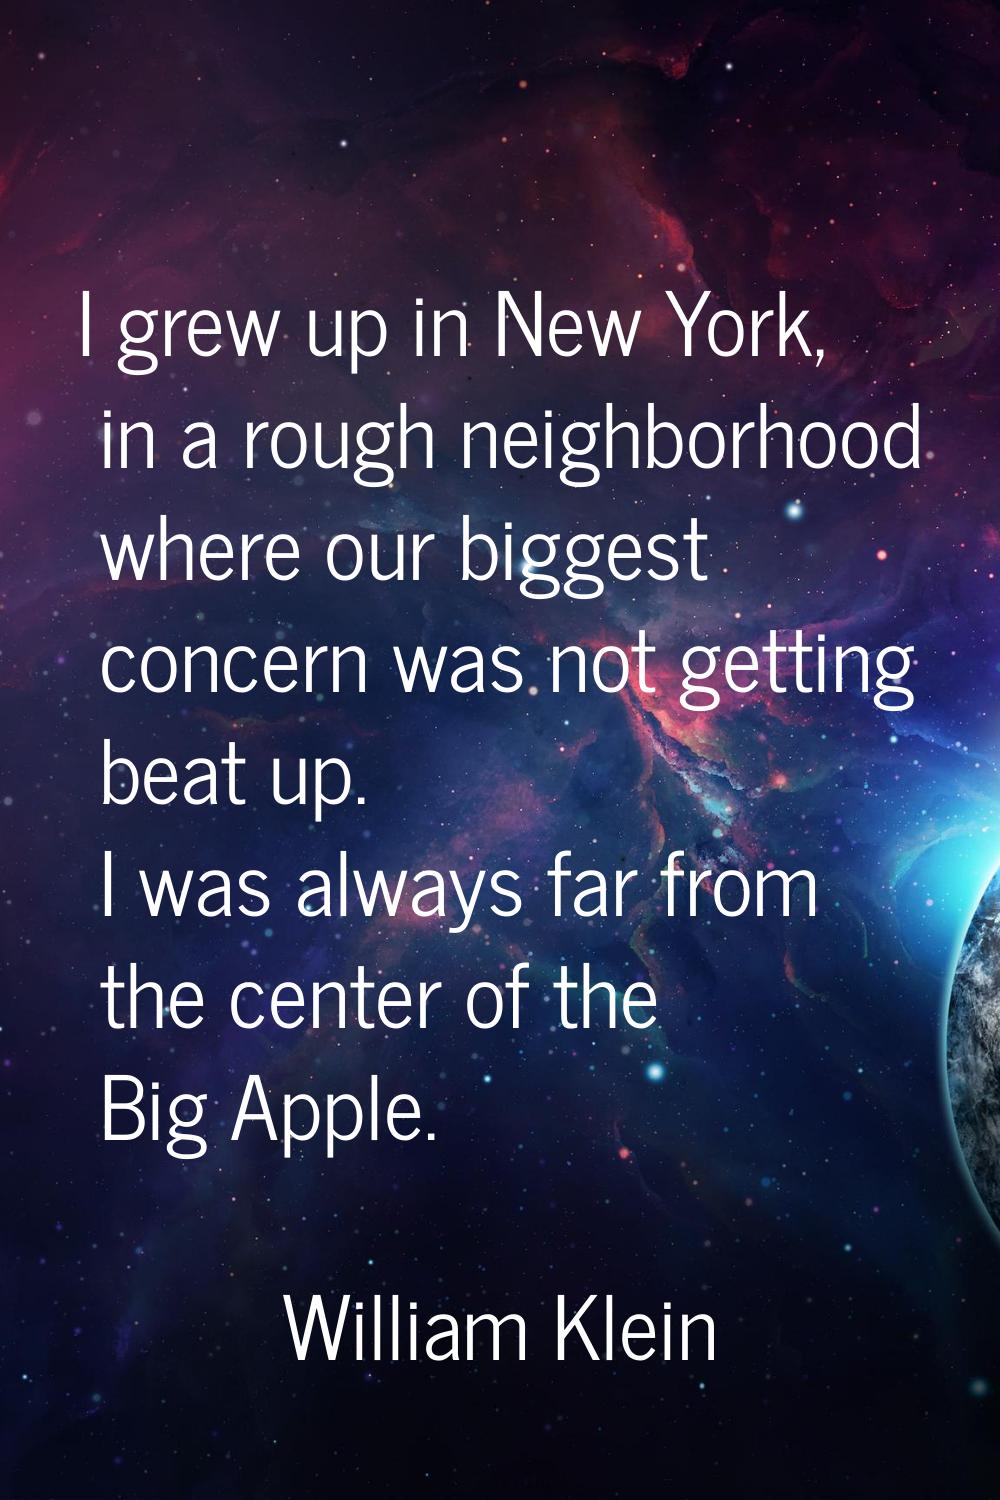 I grew up in New York, in a rough neighborhood where our biggest concern was not getting beat up. I